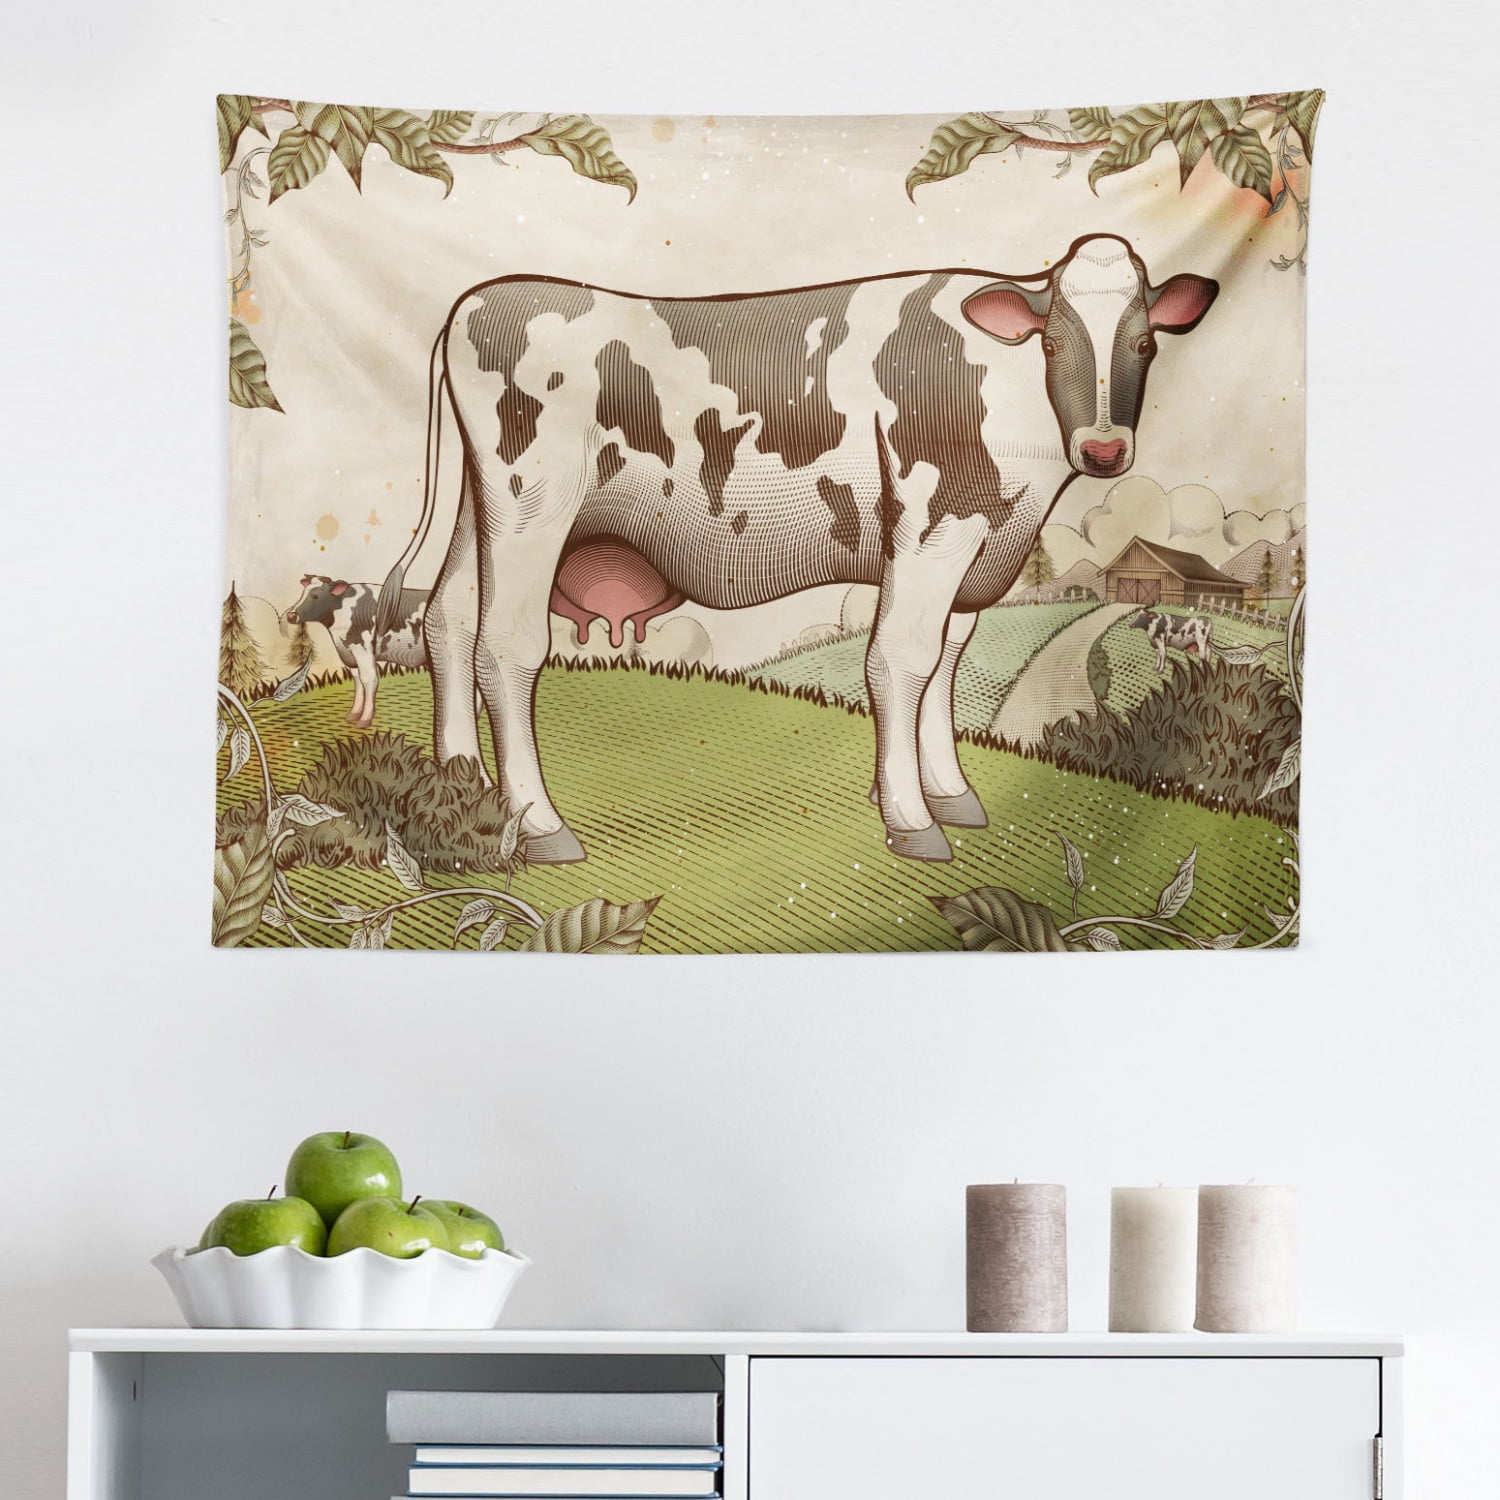 Farm Animal Tapestry, Vintage Agriculture Illustration of Dairy Cows at  Countryside Livestock, Fabric Wall Hanging Decor for Bedroom Living Room  Dorm, 2 Sizes, Multicolor, by Ambesonne 